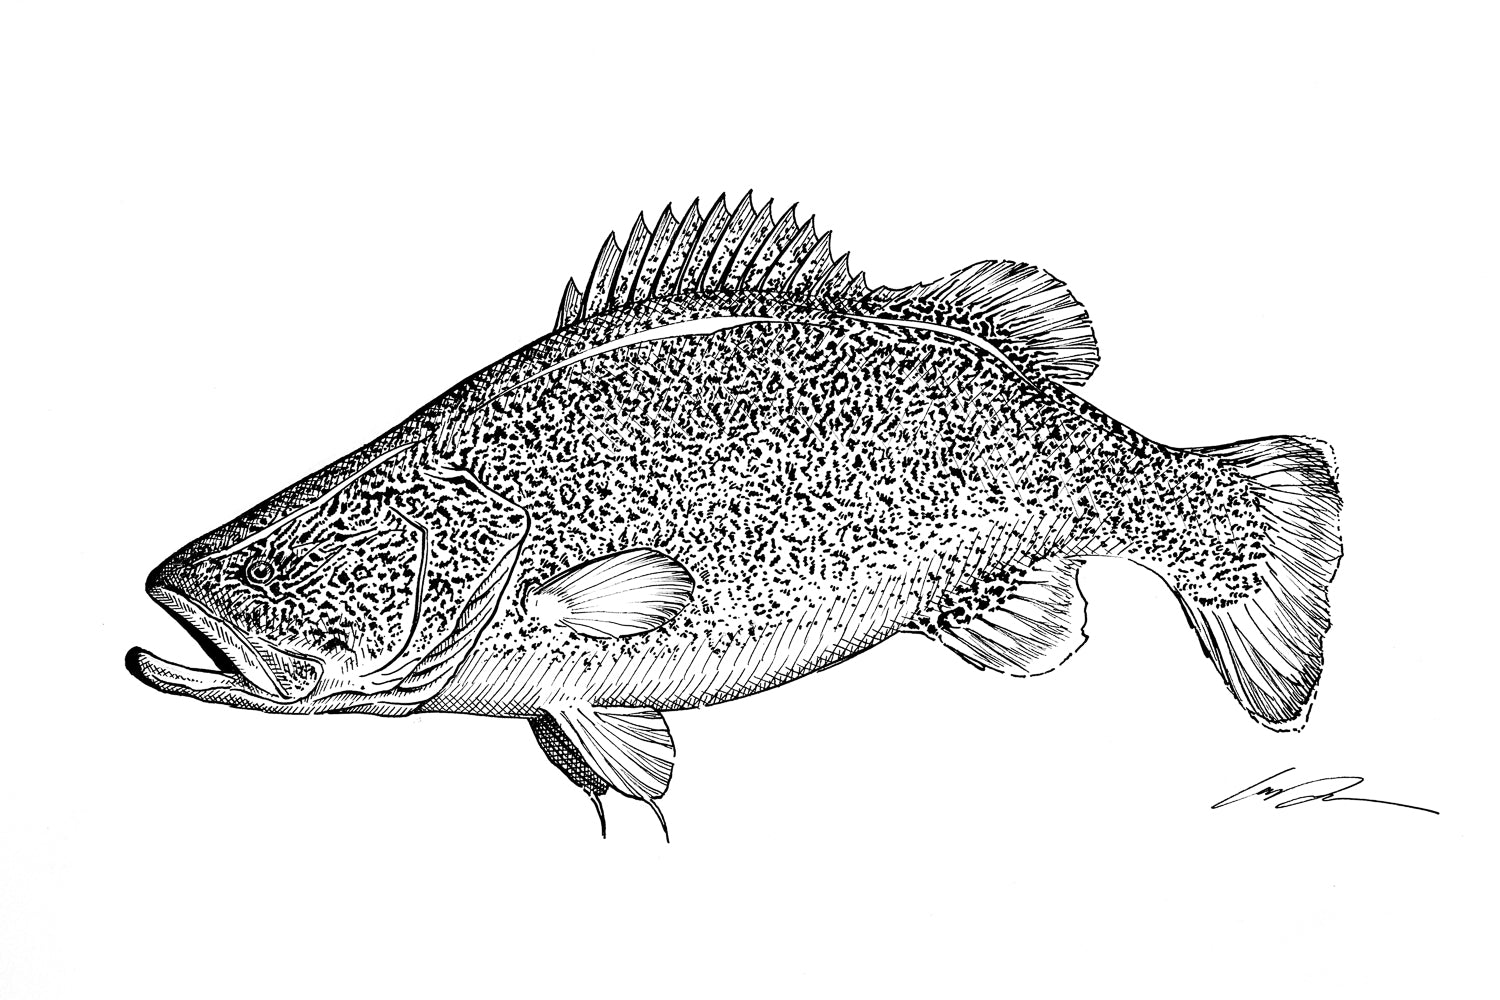 A pen and ink drawing of a Murray Cod fish on white paper.